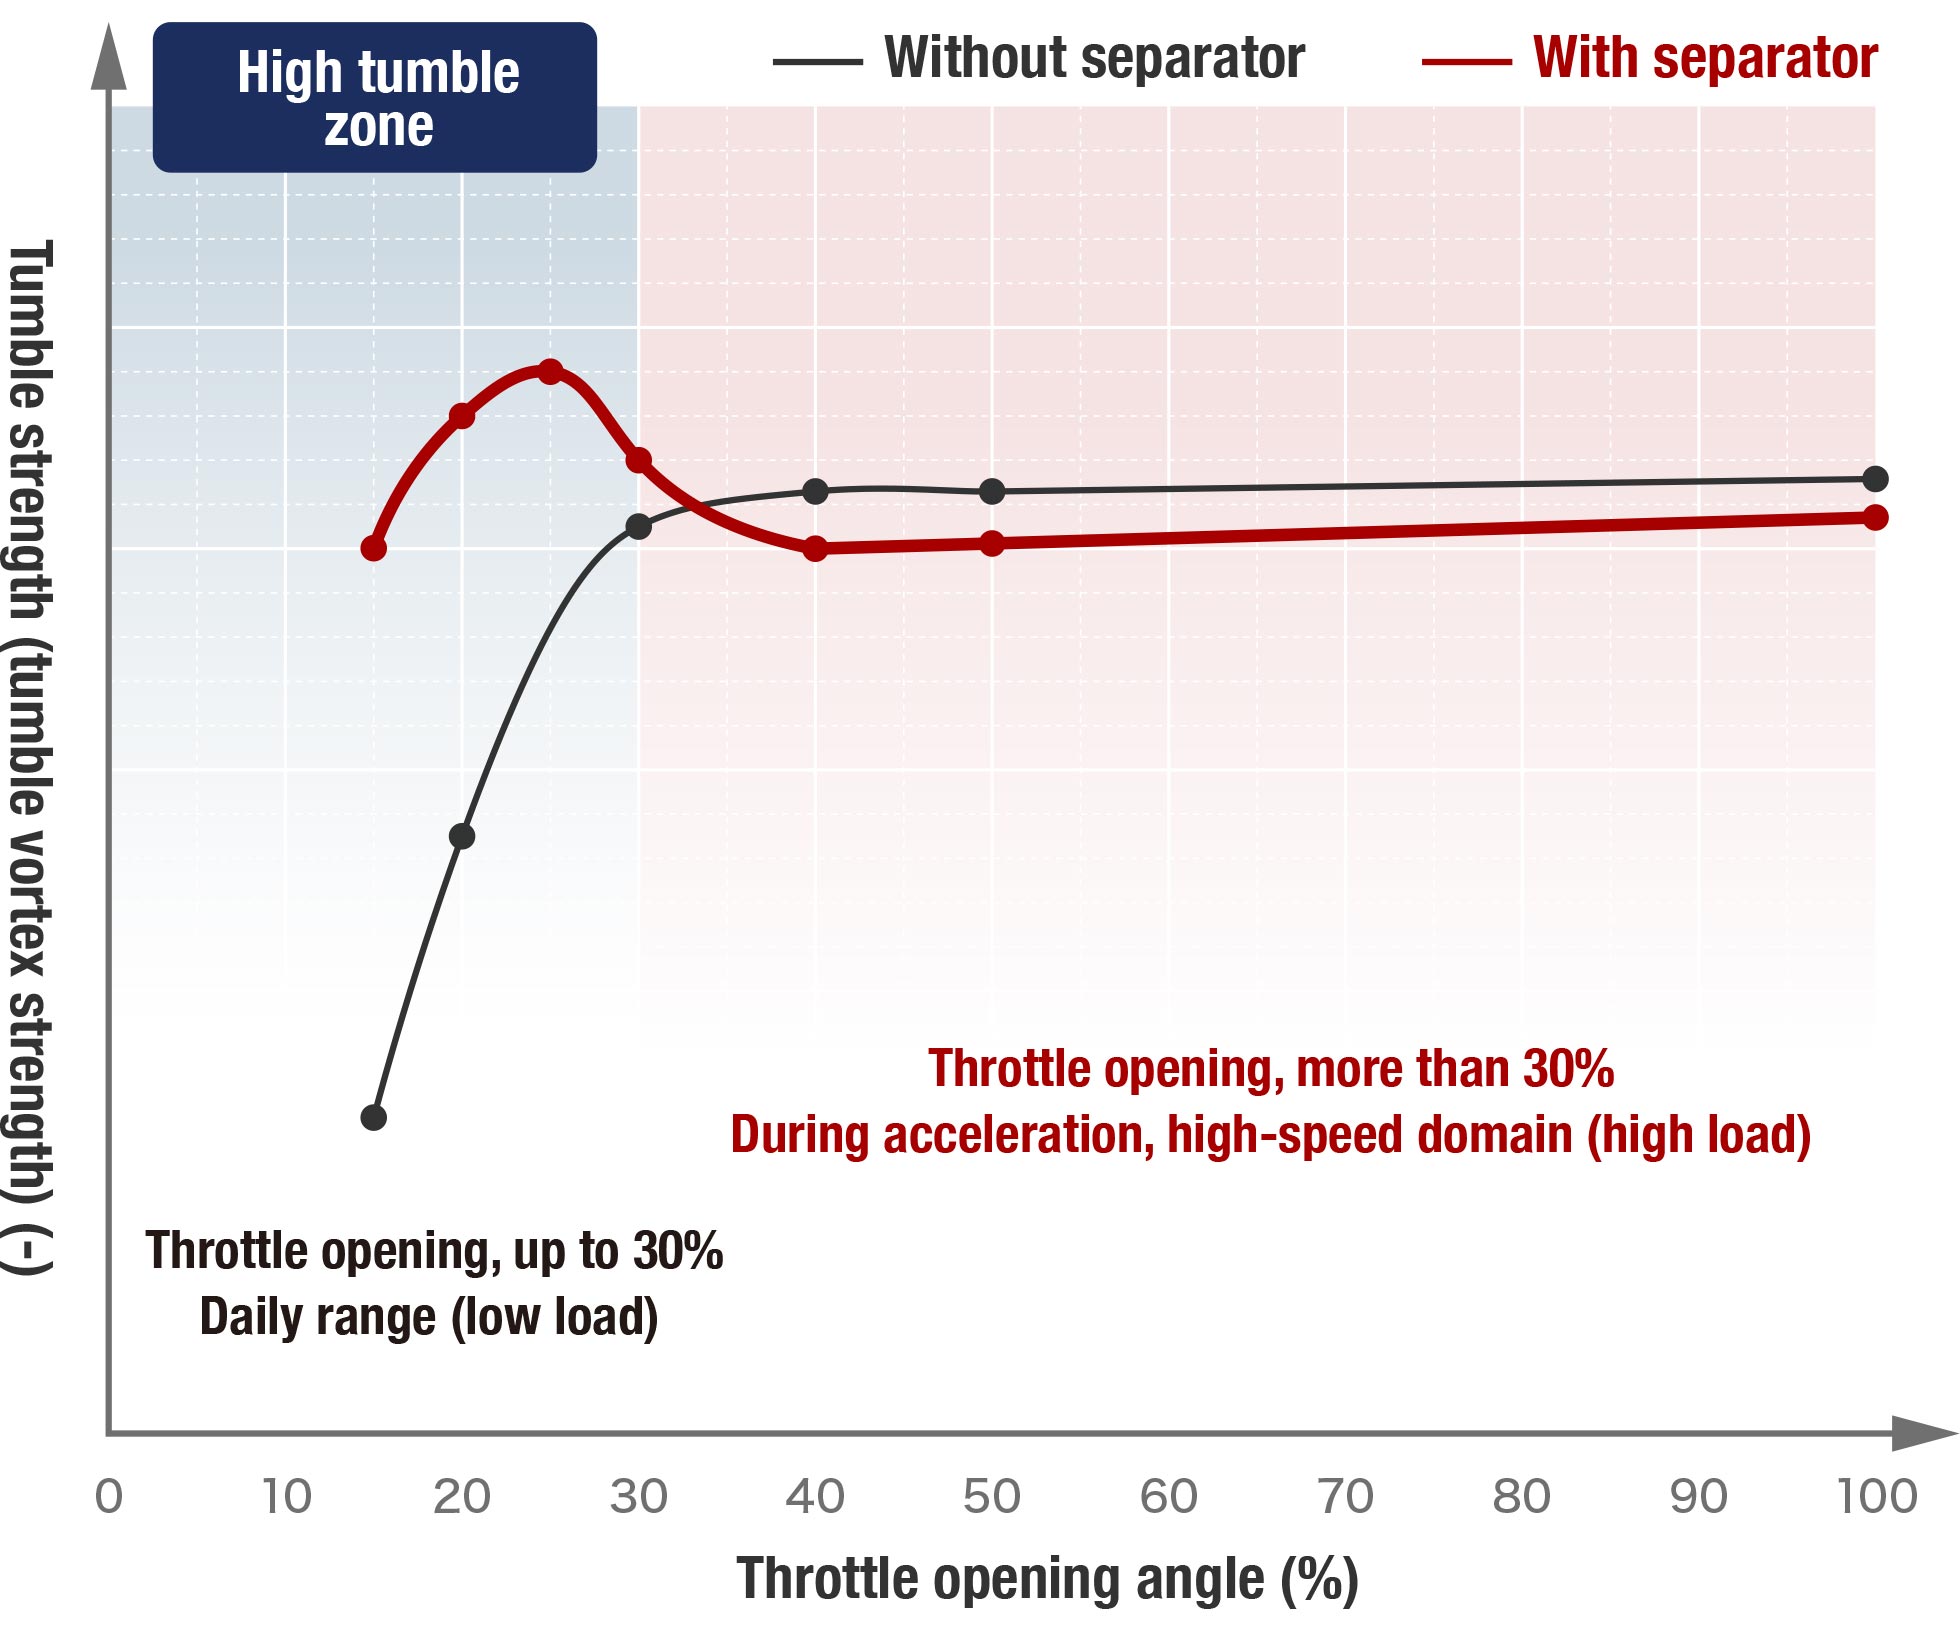 -Diagram of the relationship between throttle opening and tumble strength